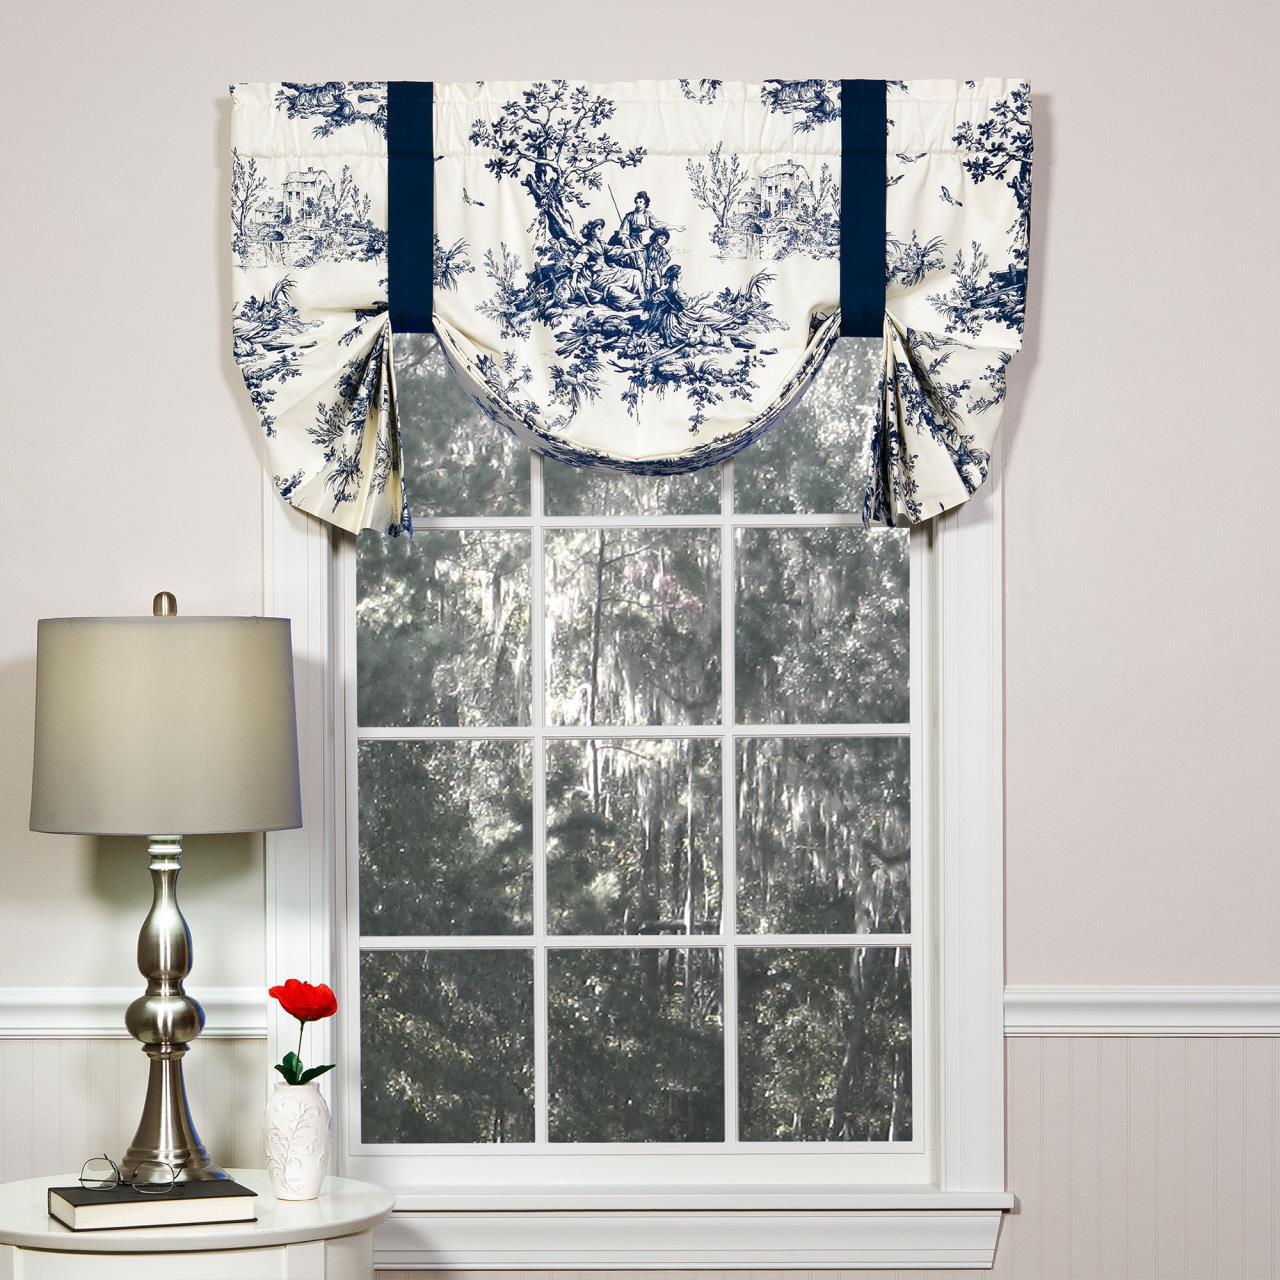 Bouvier Black - Toile Fabric by the Yard Thomasville at Home